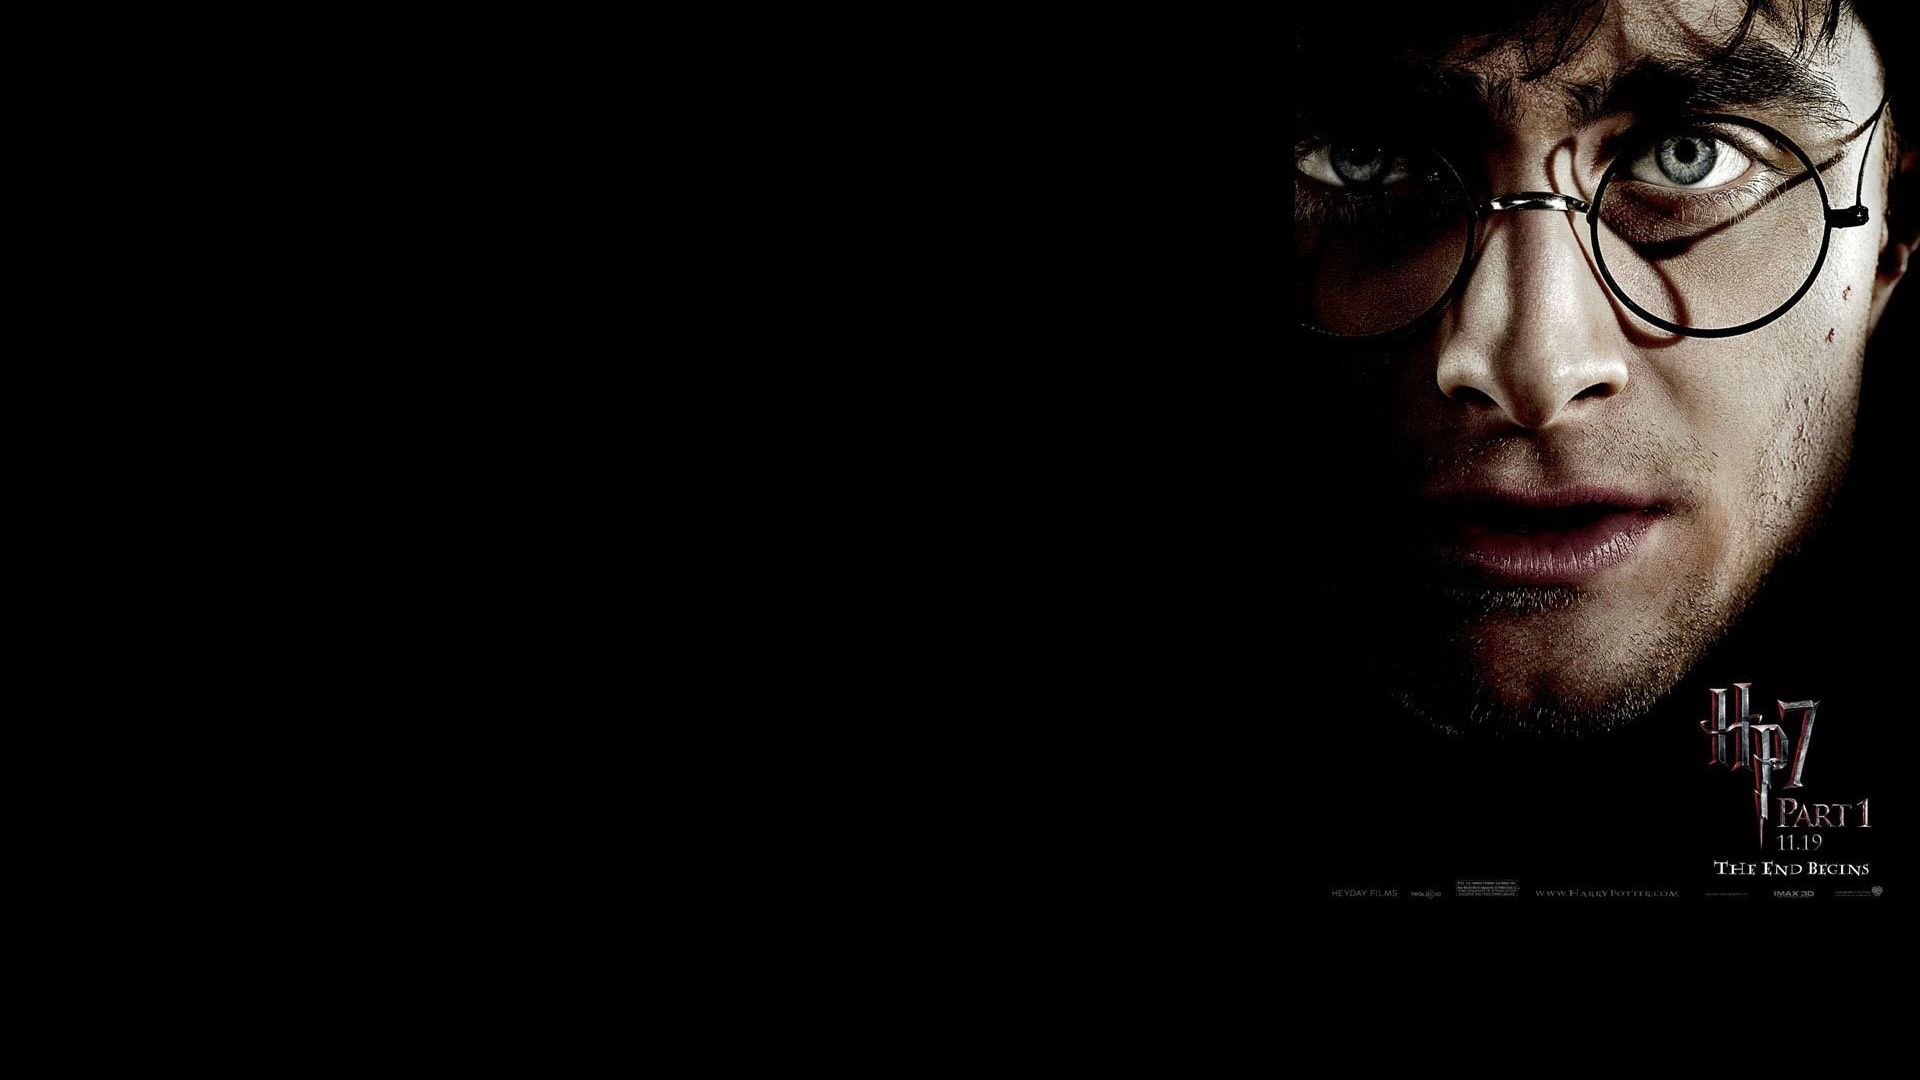 harry potter, movie, harry potter and the deathly hallows: part 1, daniel radcliffe